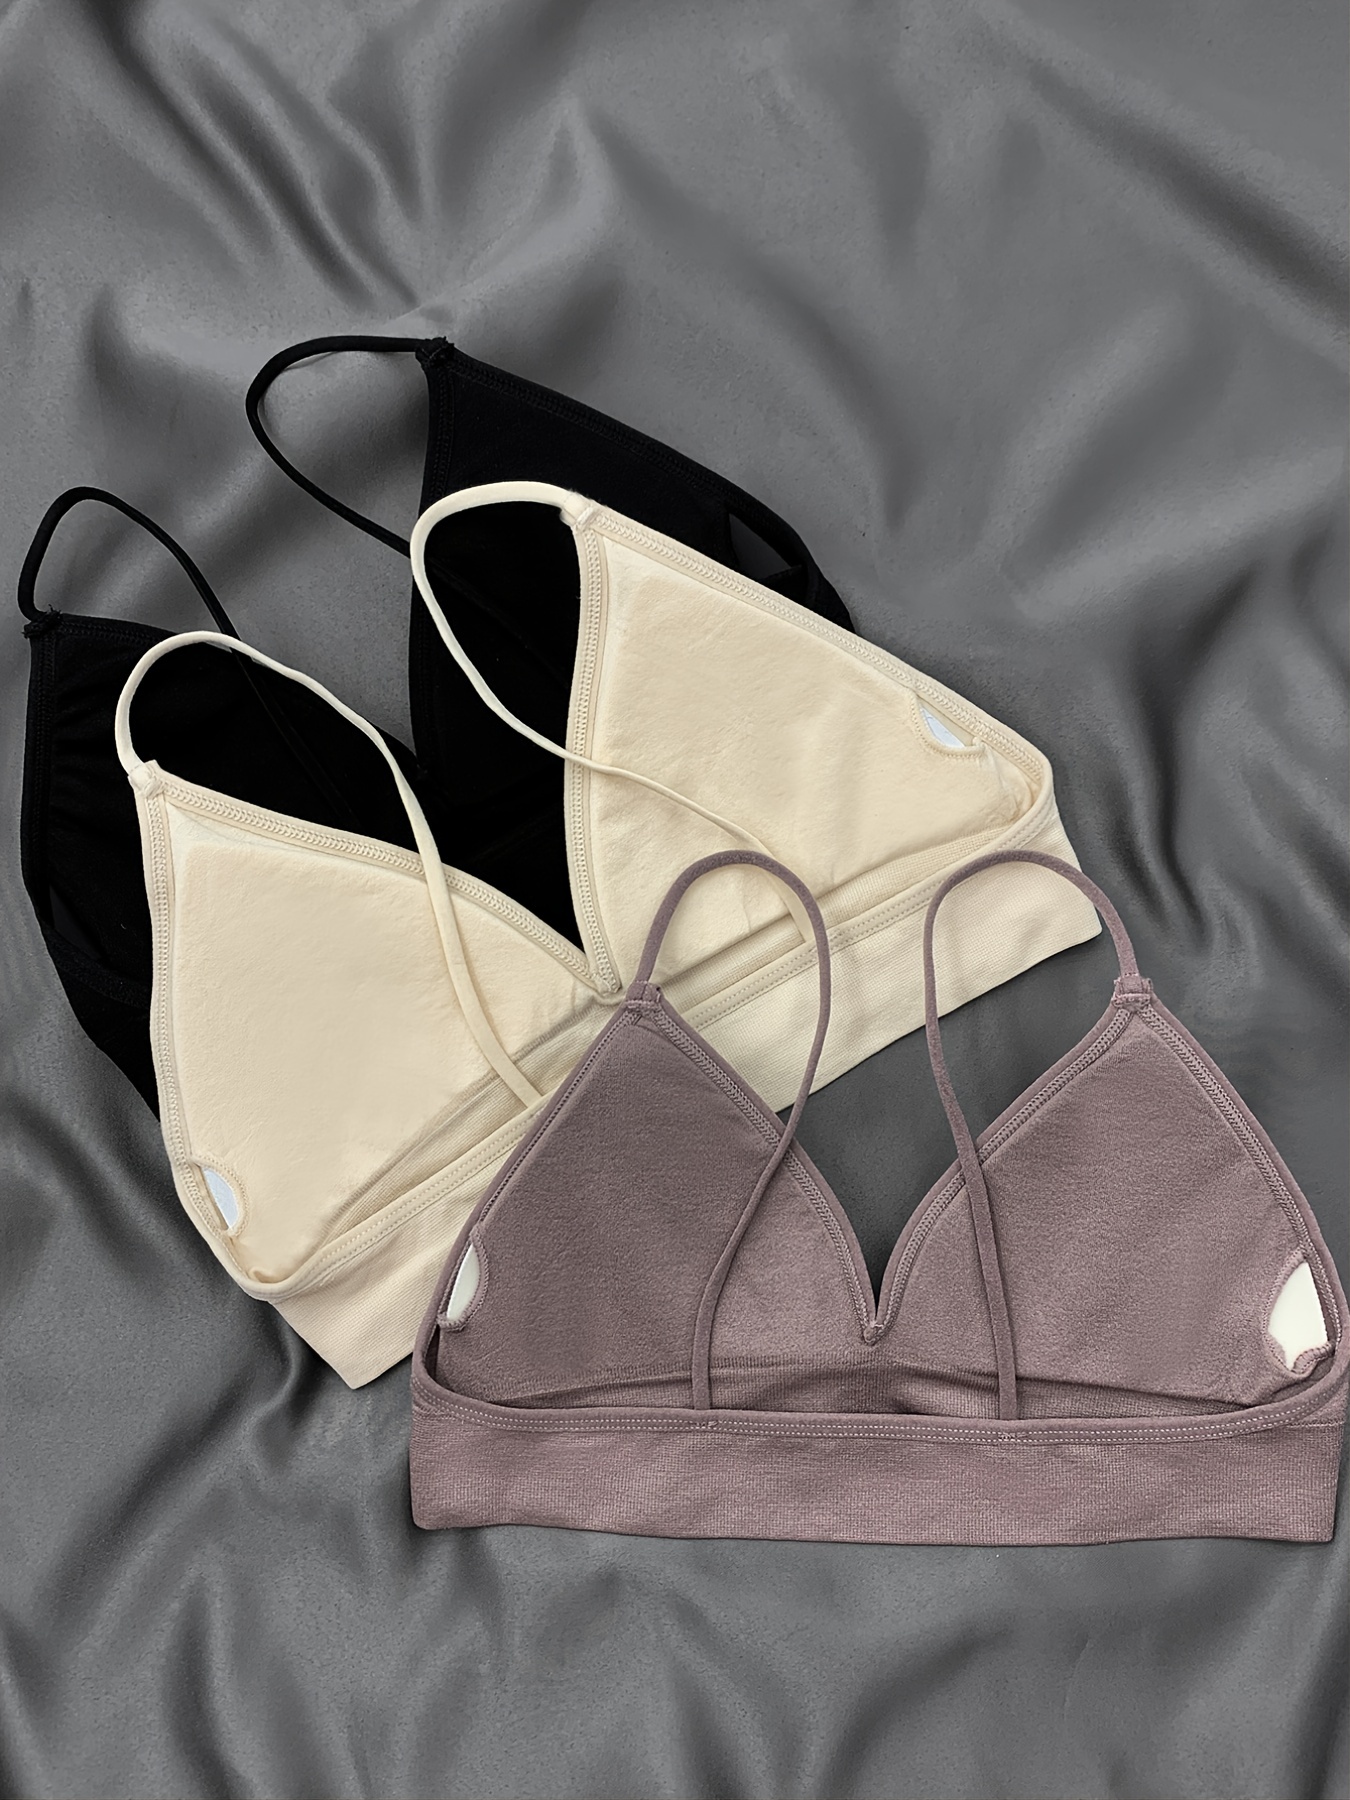 Padded Bras, Bralettes, Push-Up, Wireless & More